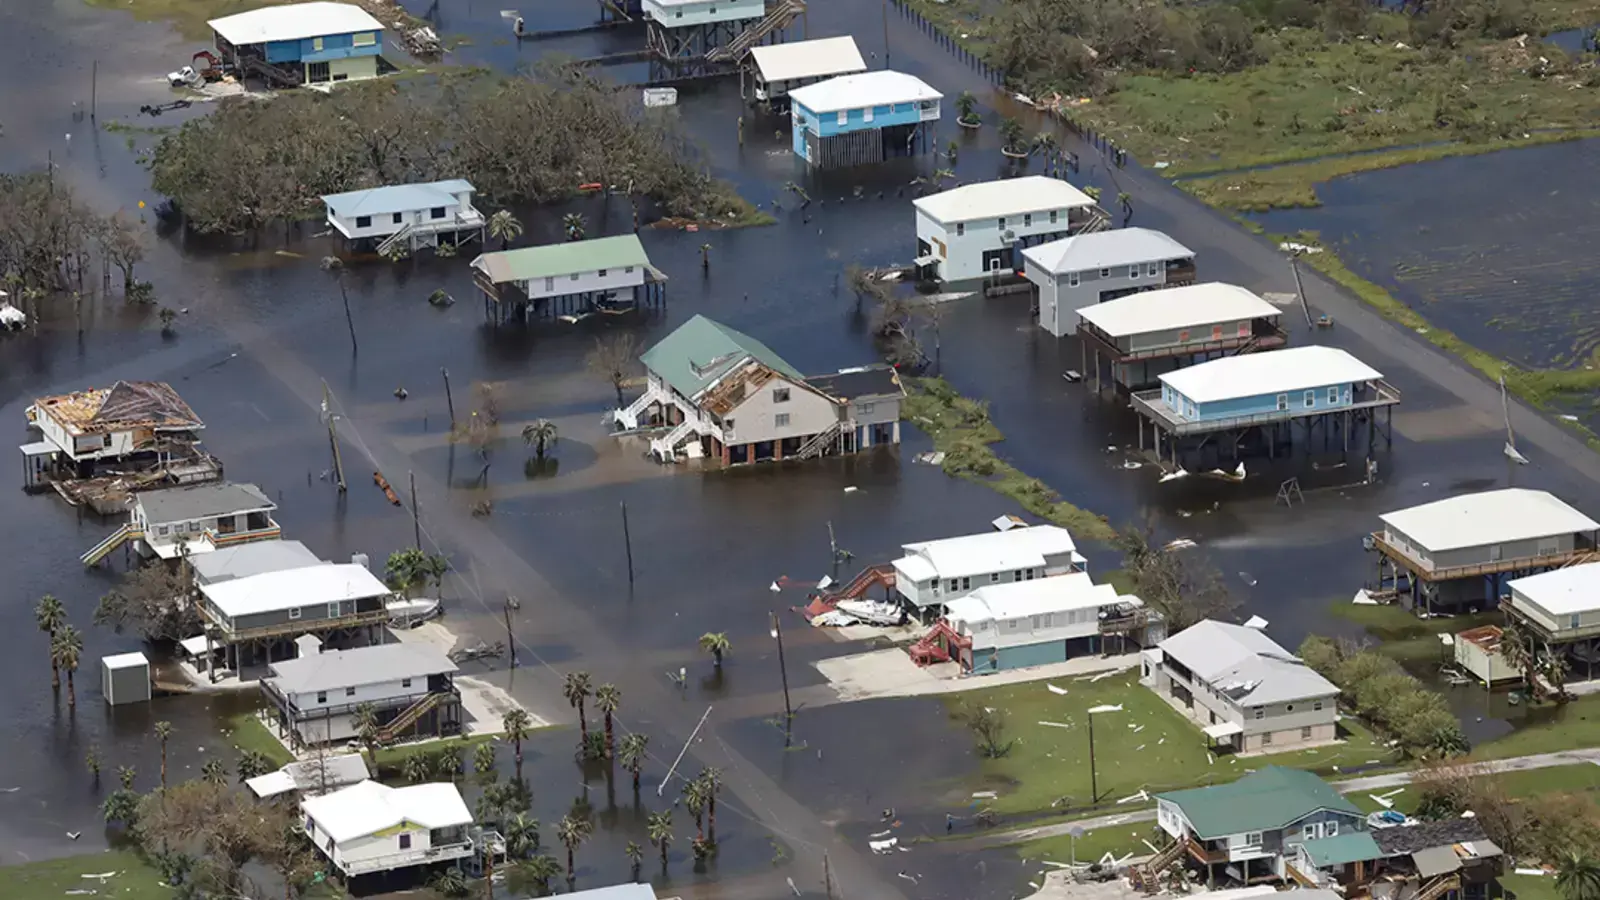 An aerial view shows houses destroyed by flooding after Hurricane Ida made landfall in Louisiana.